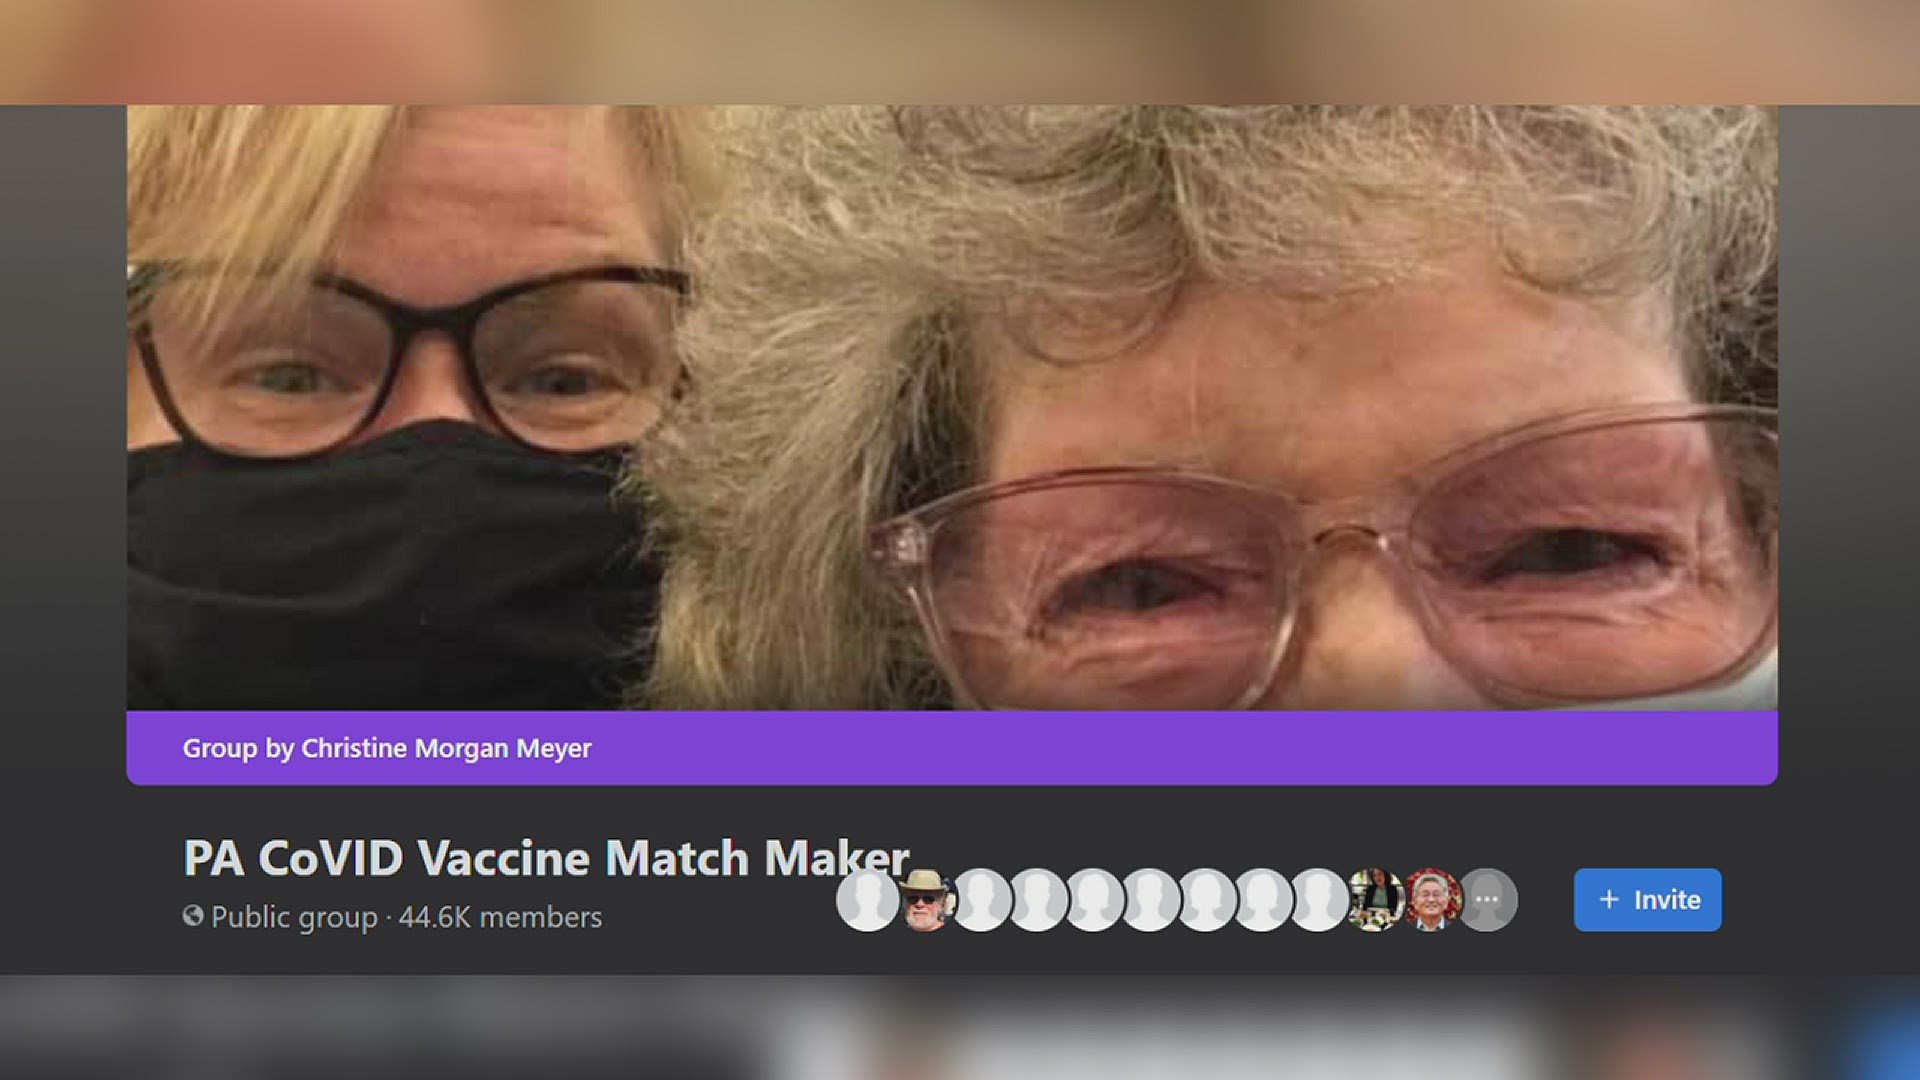 Max Rotondo explains how people can use the PA Covid Vaccine Matchmaker facebook page to find appointments